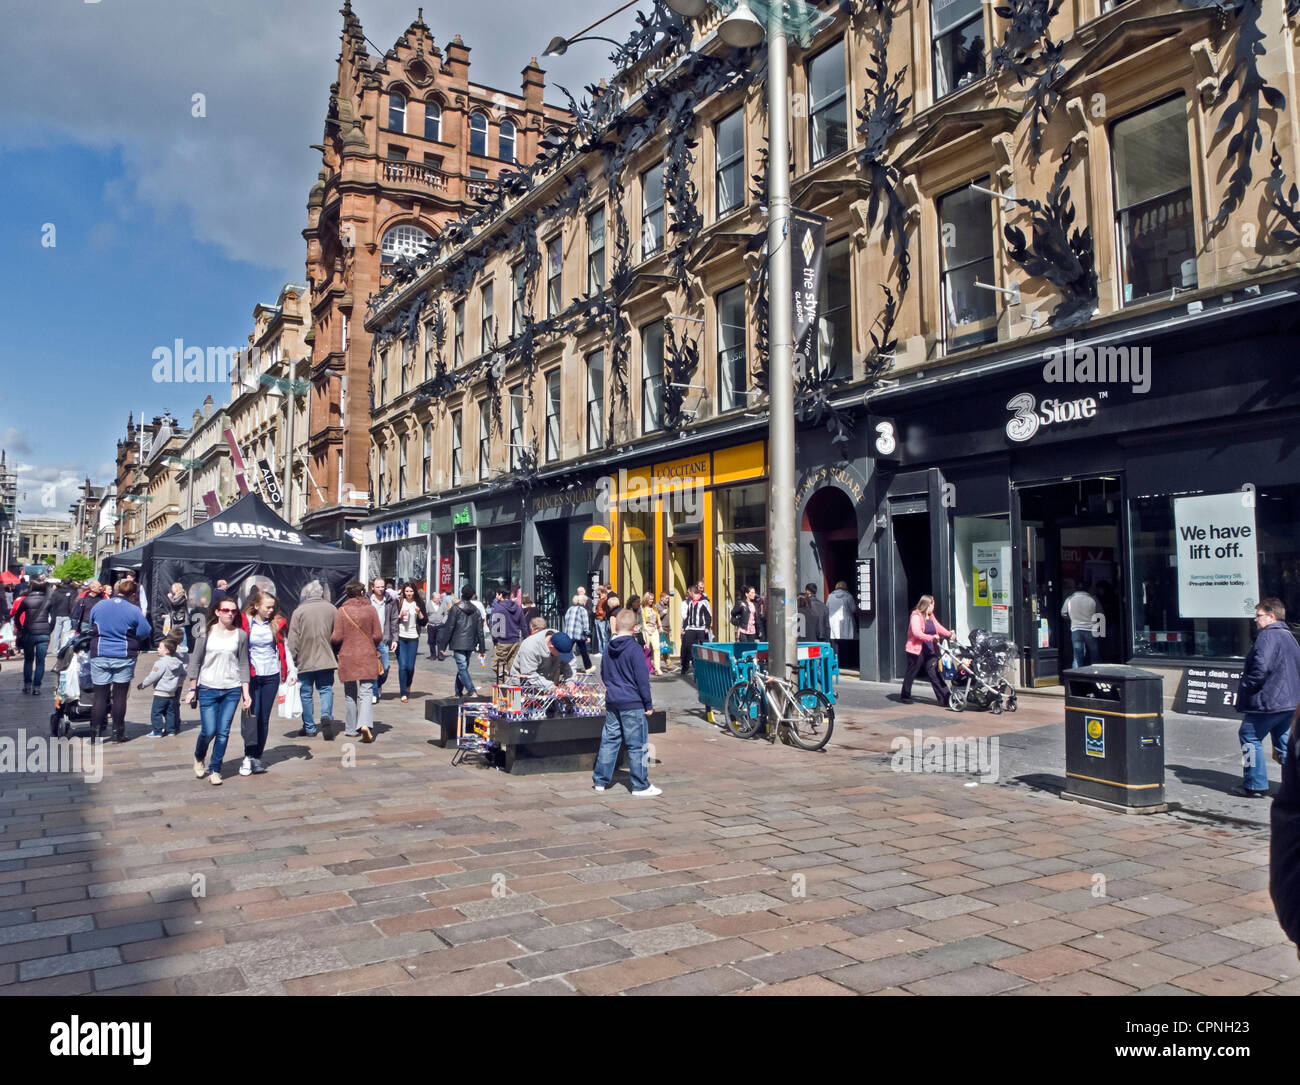 Shoppers and visitors in Buchanan Street at the Princes Square building in Glasgow Scotland on a sunny spring day Stock Photo